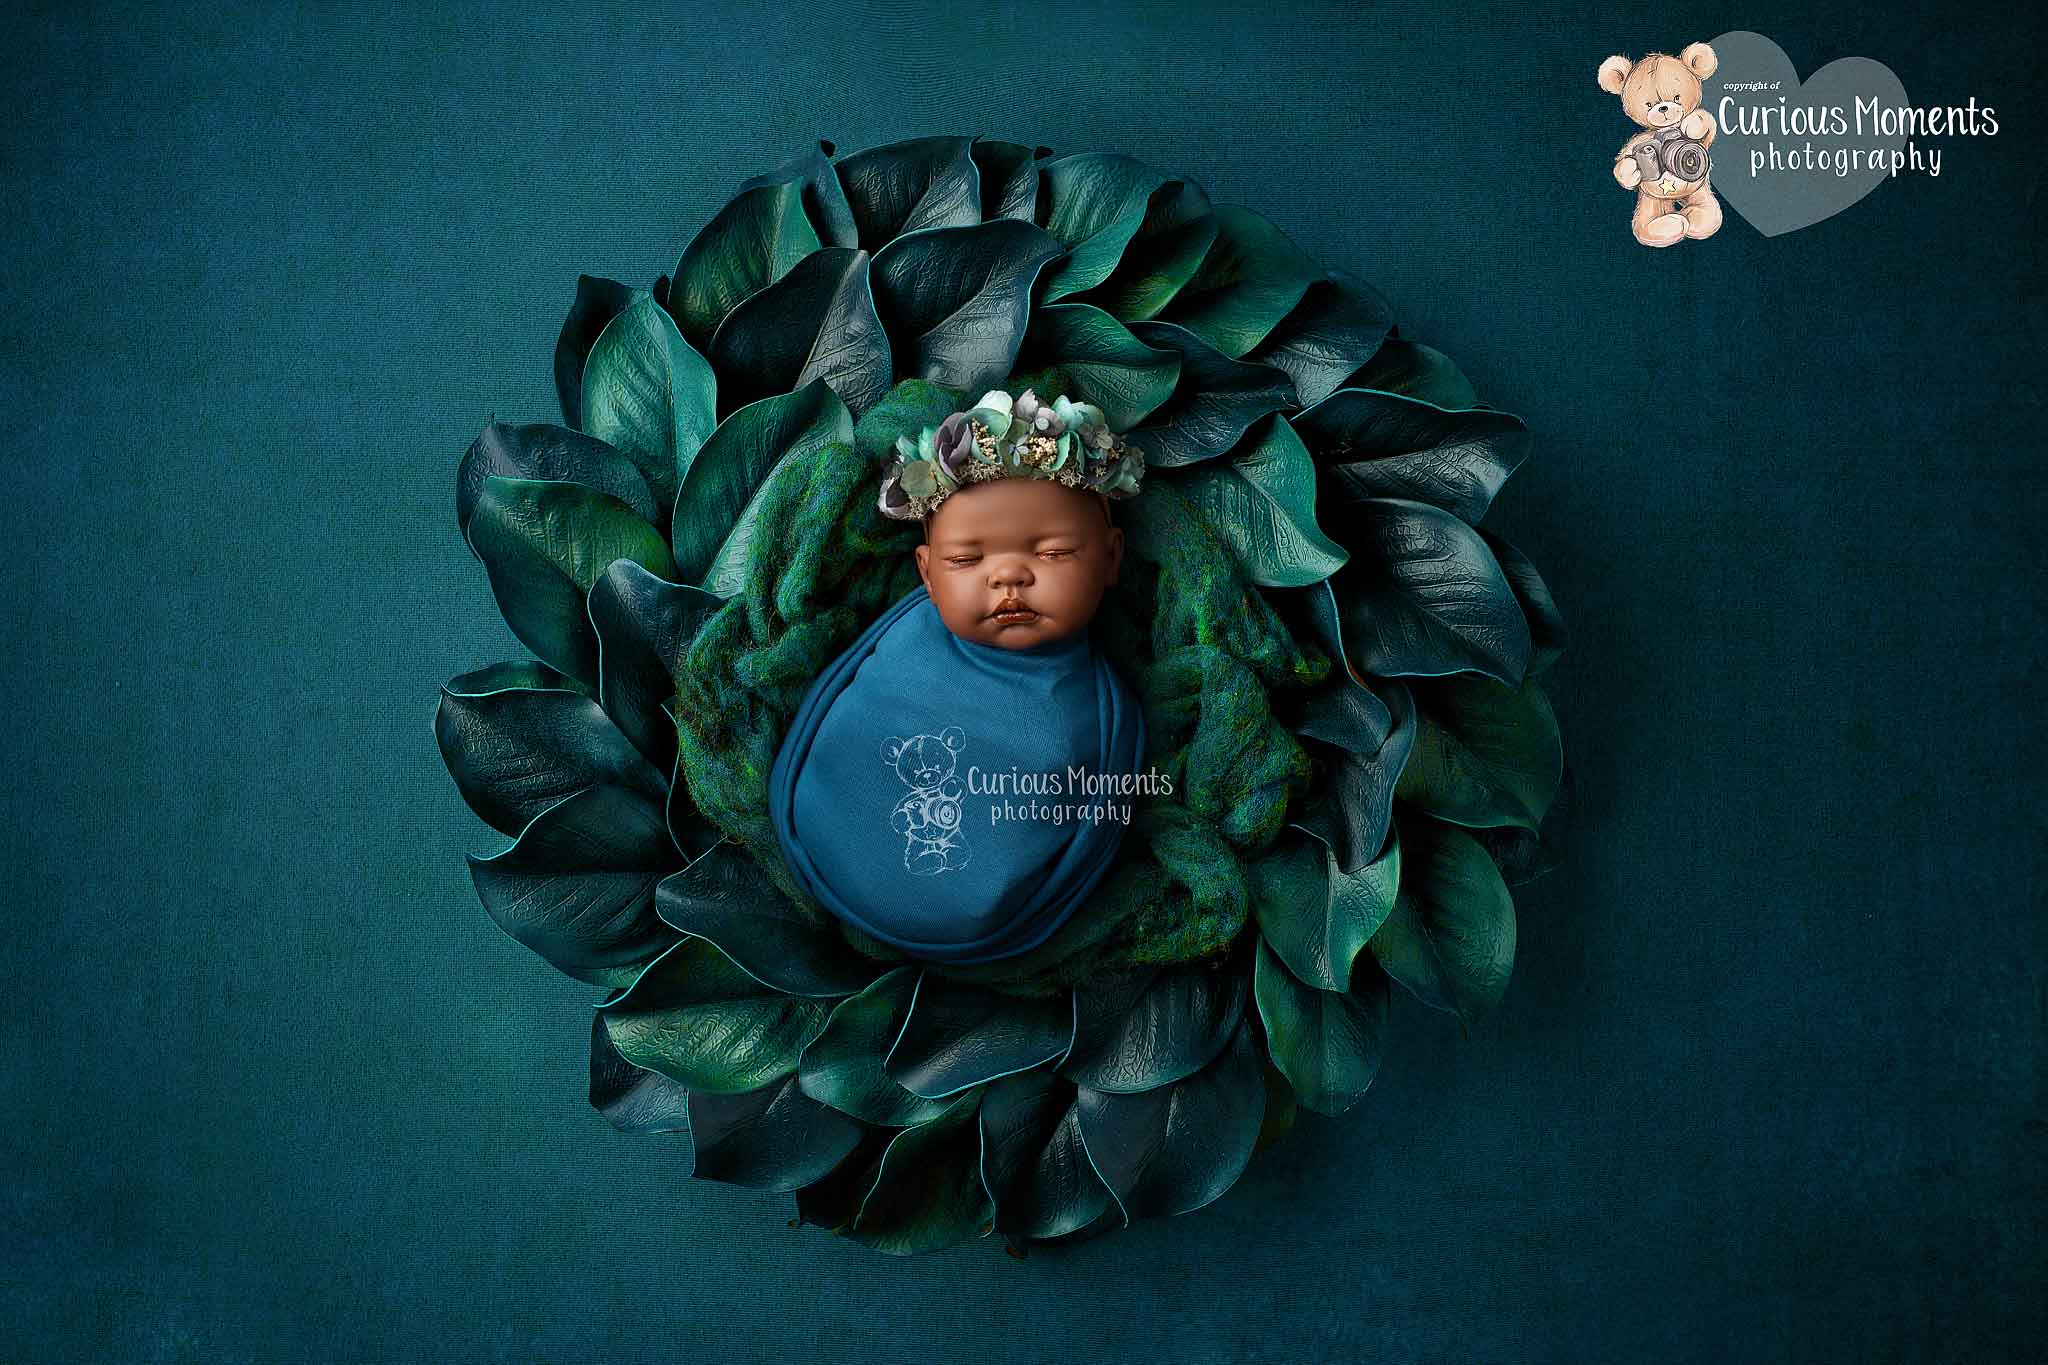 Ethnic baby girl in teal floral crown lying in a large flower